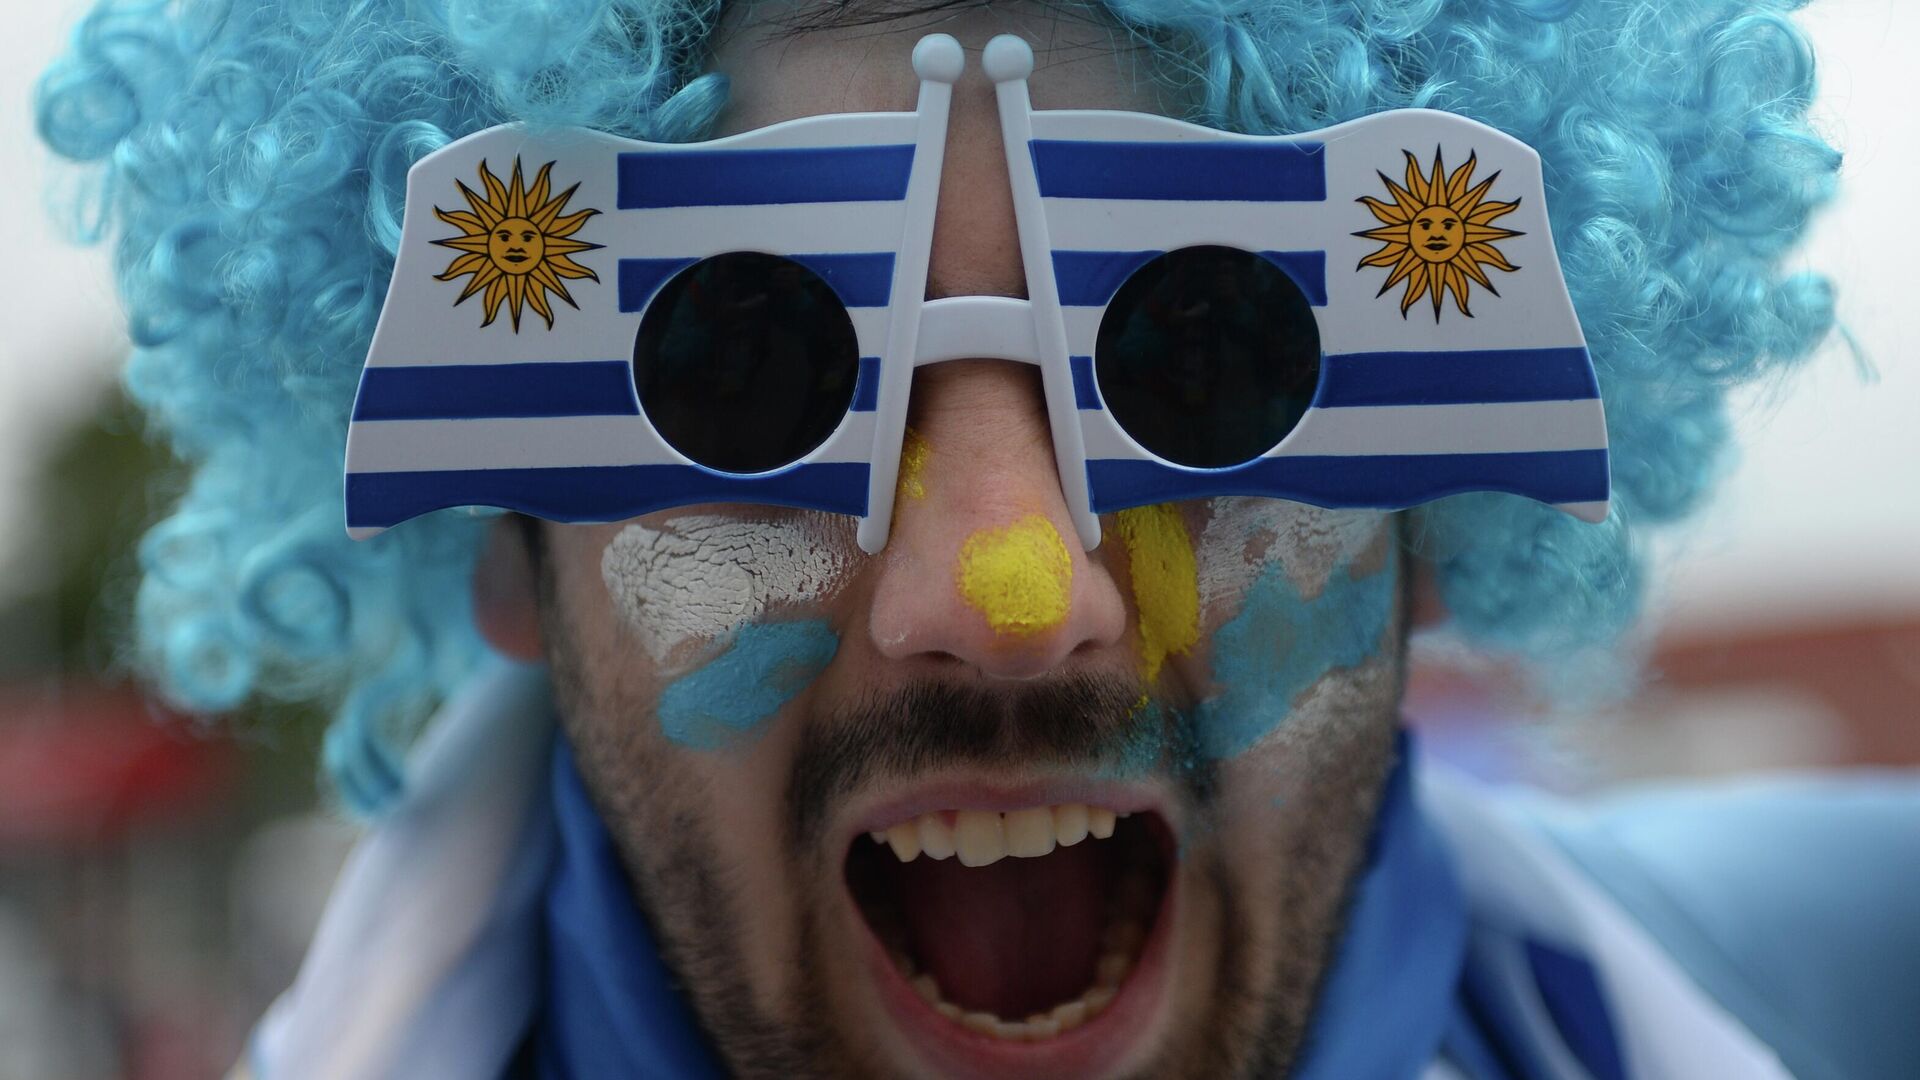 Fan of the national team of Uruguay - 1920, 07/28/2022